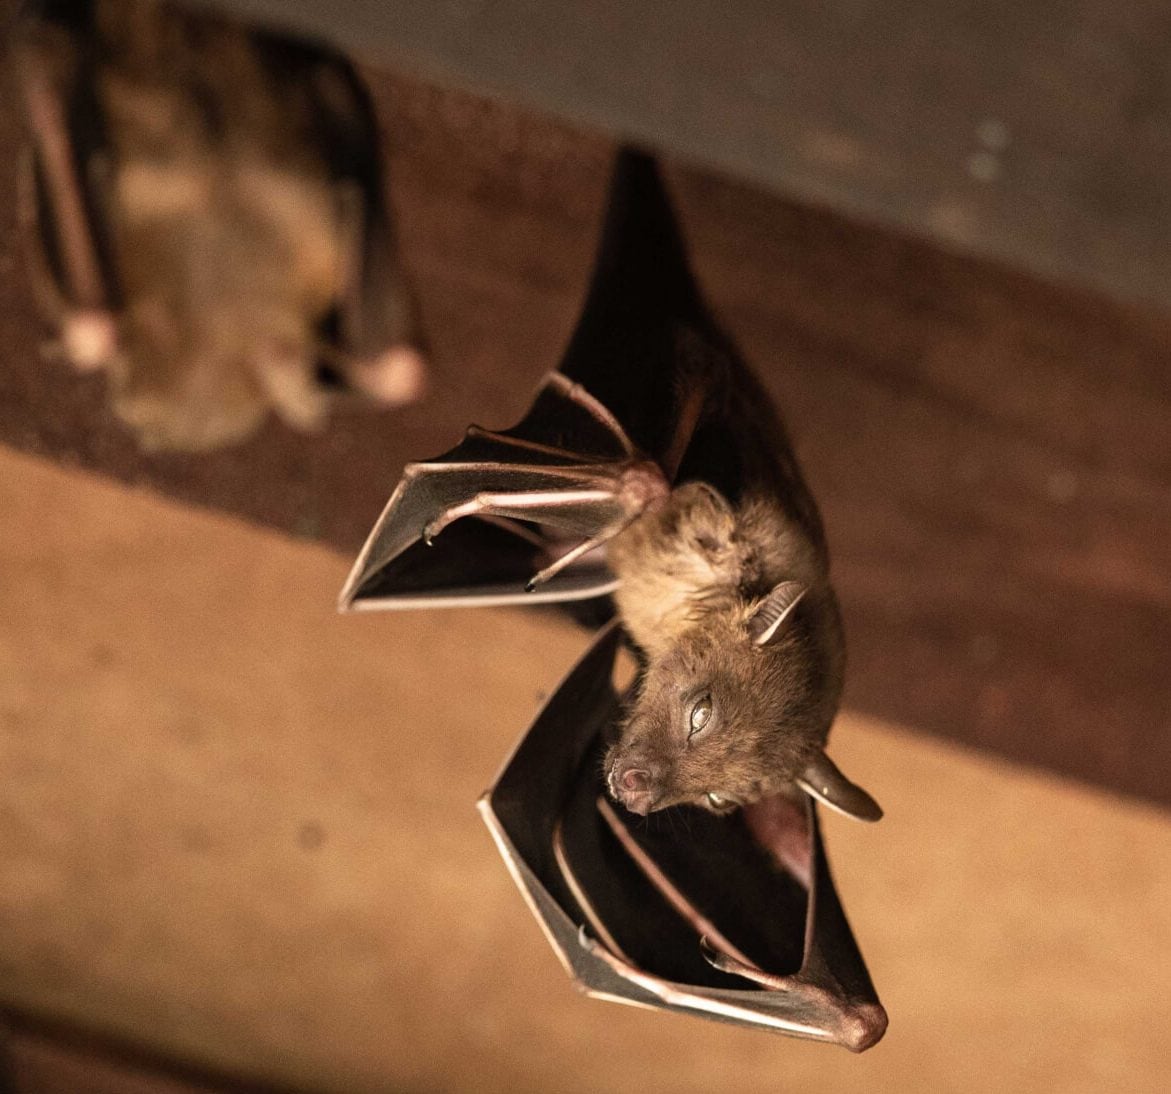 Expert bat removal services for a safe and humane solution in Pittsburgh